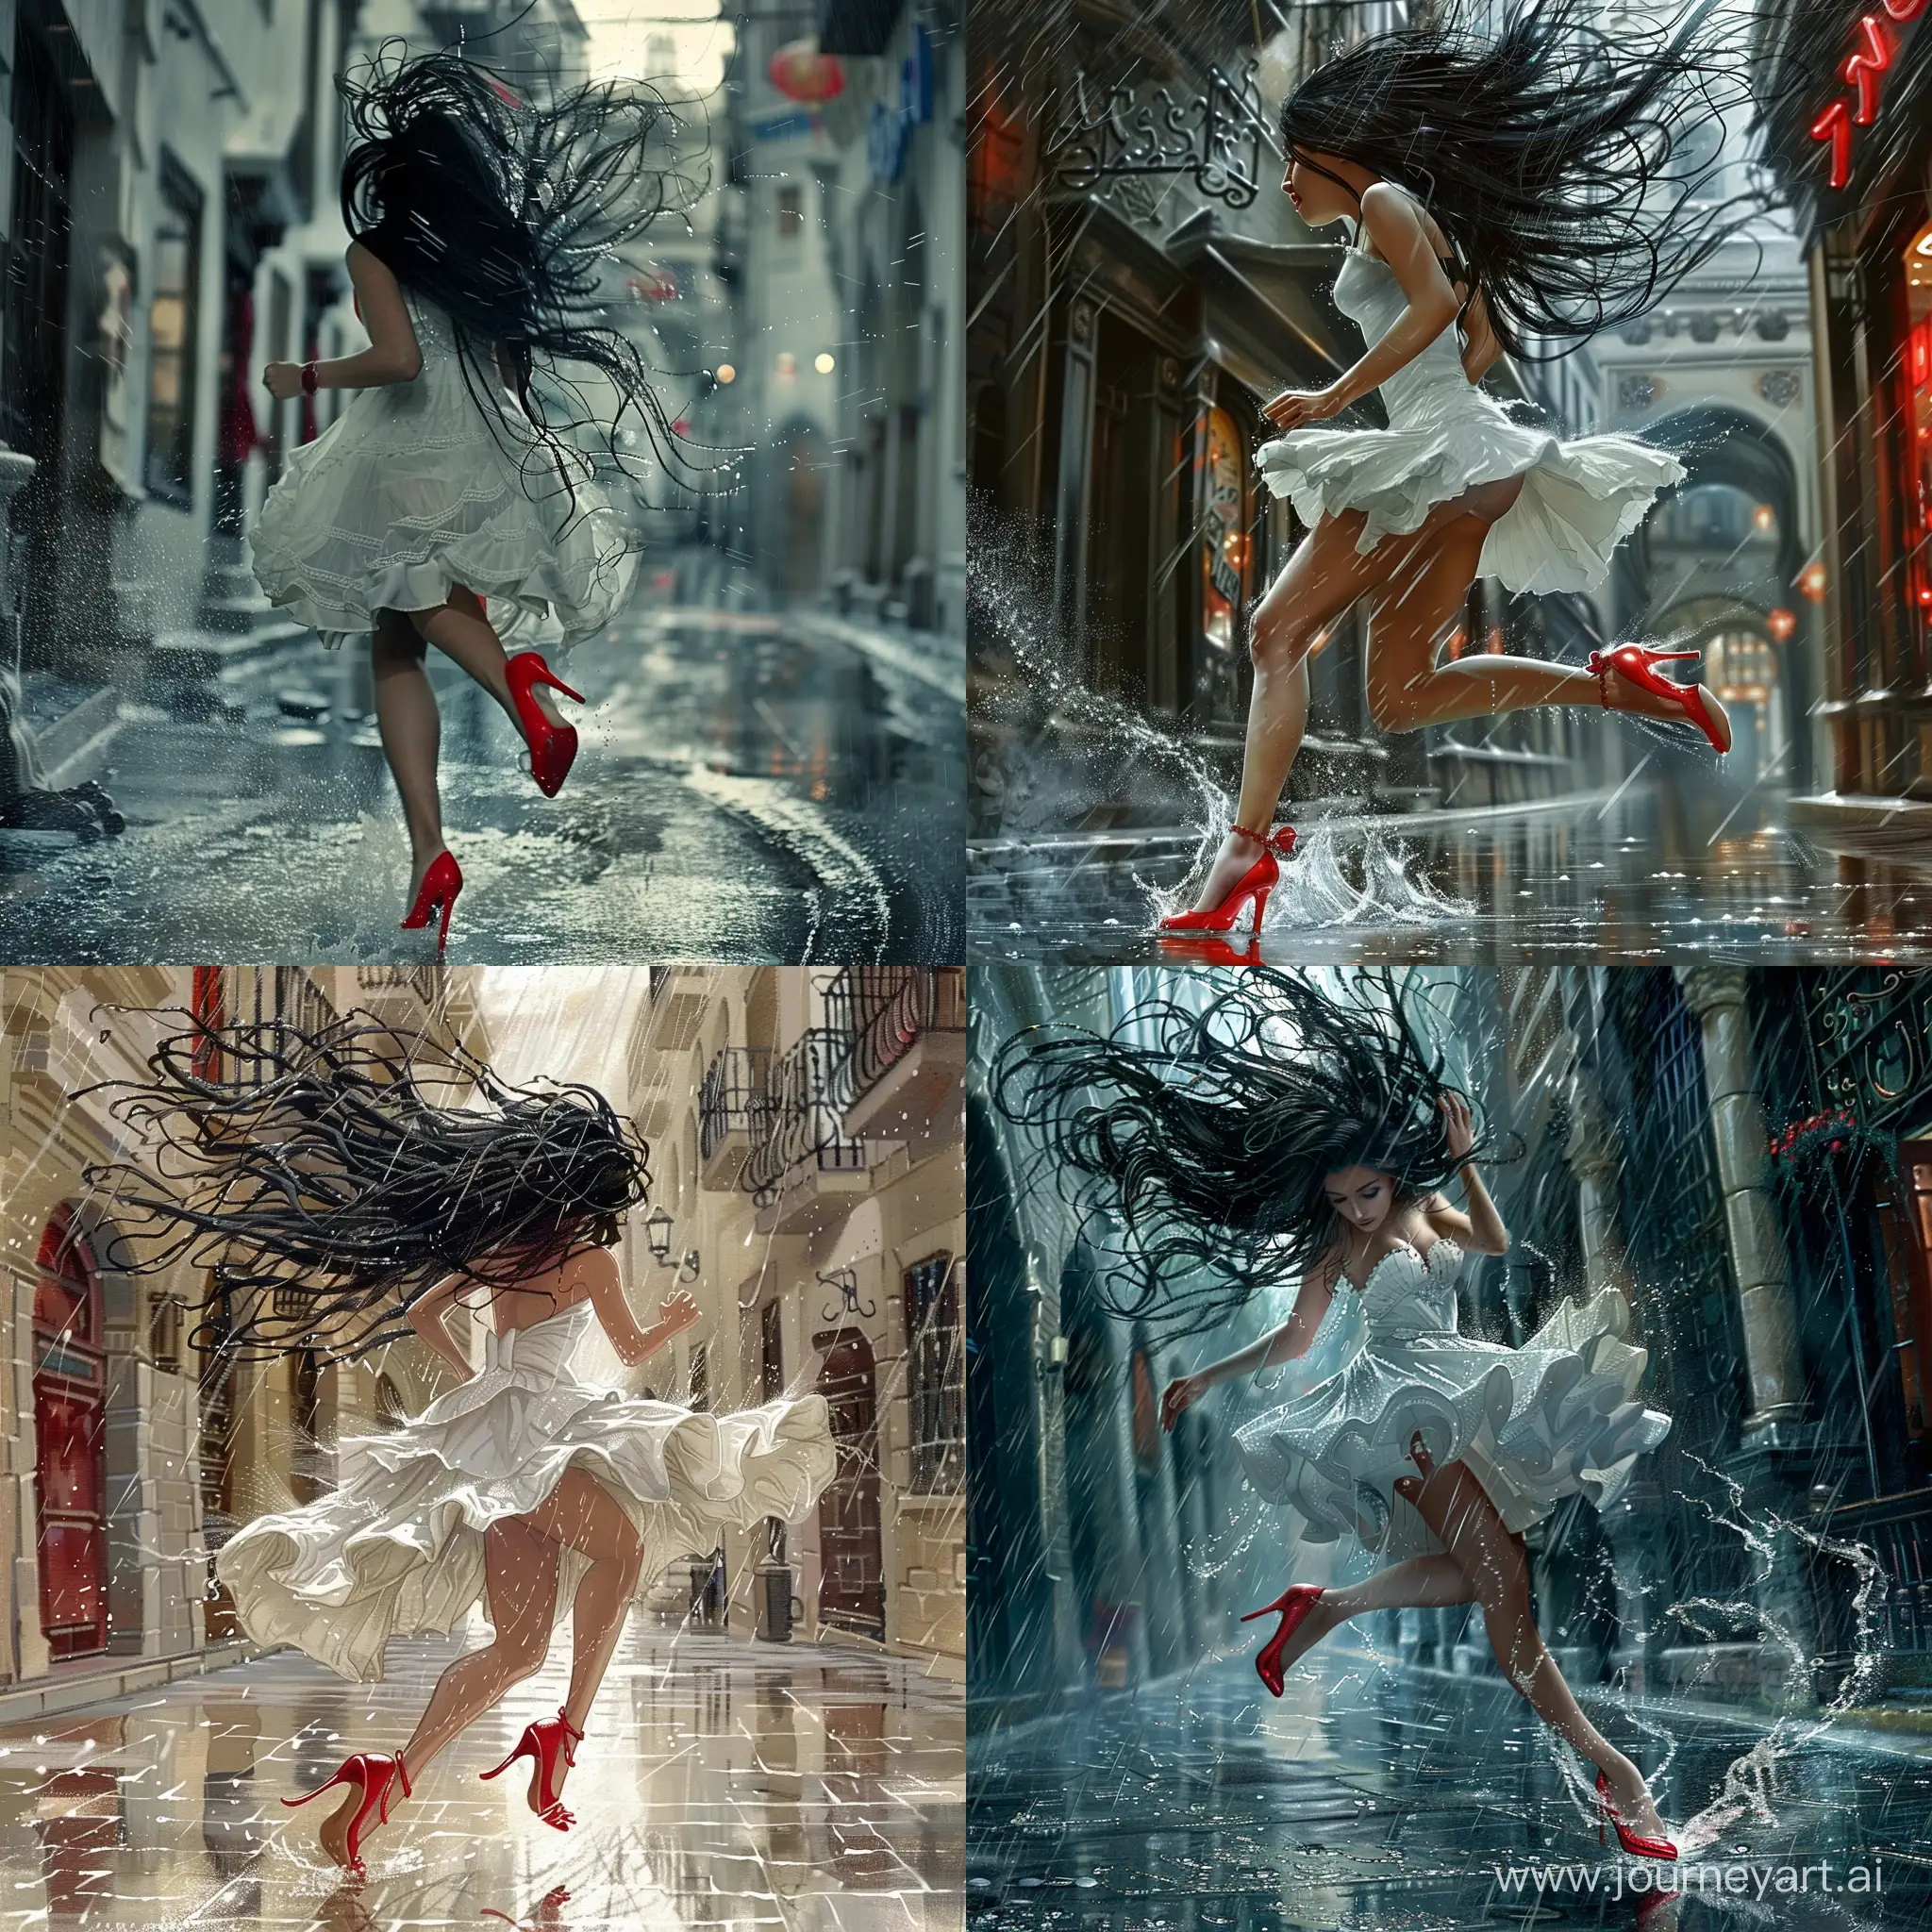 Elegant-Persian-Woman-Running-in-Rain-with-Wet-Hair-and-Dress